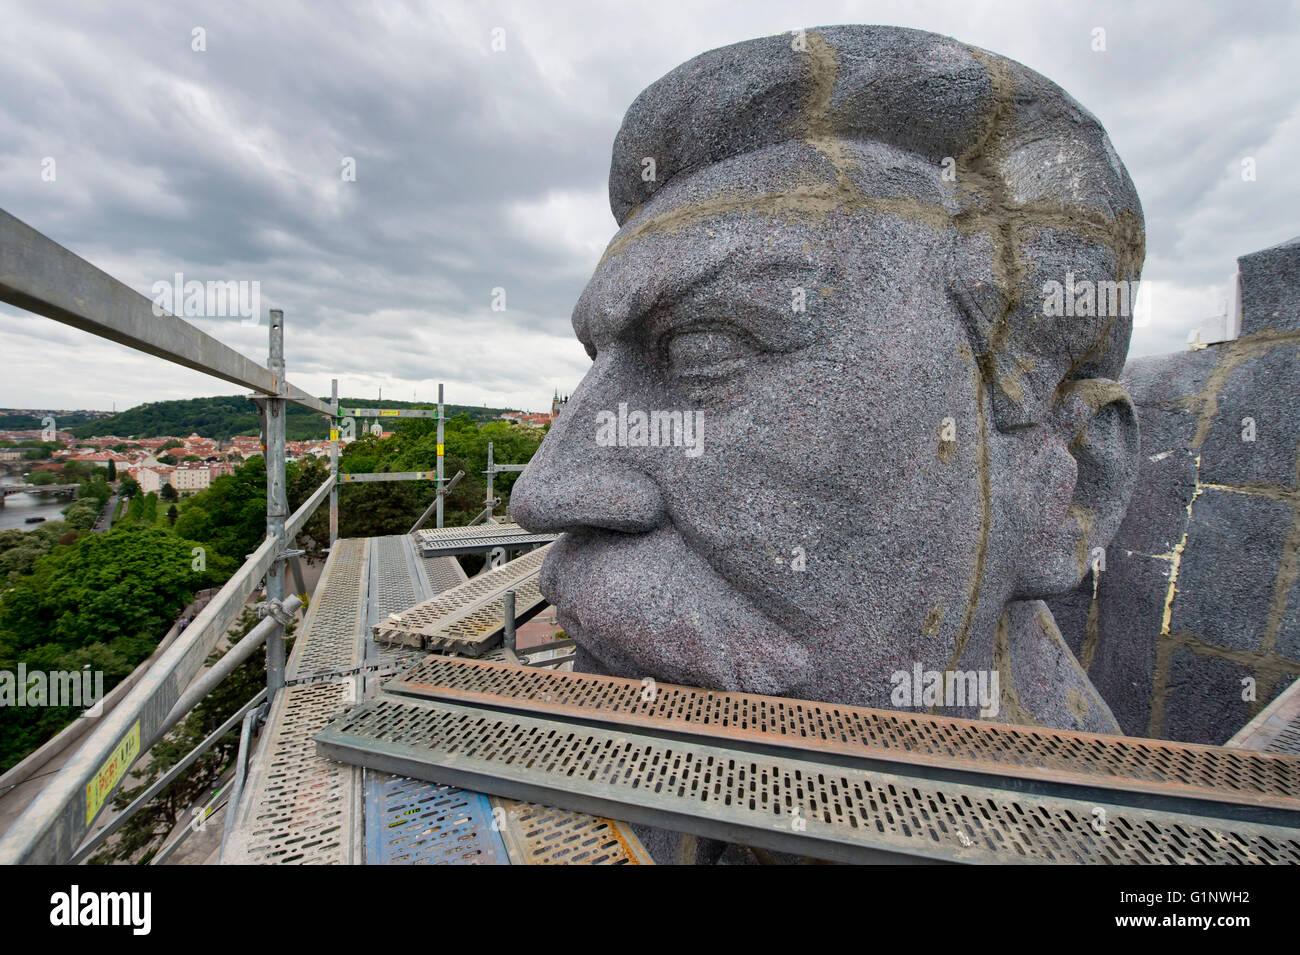 Prague, Czech Republic. 17th May, 2016. A dummy giant sculpture, replica of the Prague monument to Joseph Stalin that was the largest of its kind in Europe in the 1950s, is being built in its original place these days by film makers focusing on the life of its author, sculptor Otakar Svec, in Prague, Czech Republic, May 17, 2016. © Vit Simanek/CTK Photo/Alamy Live News Stock Photo